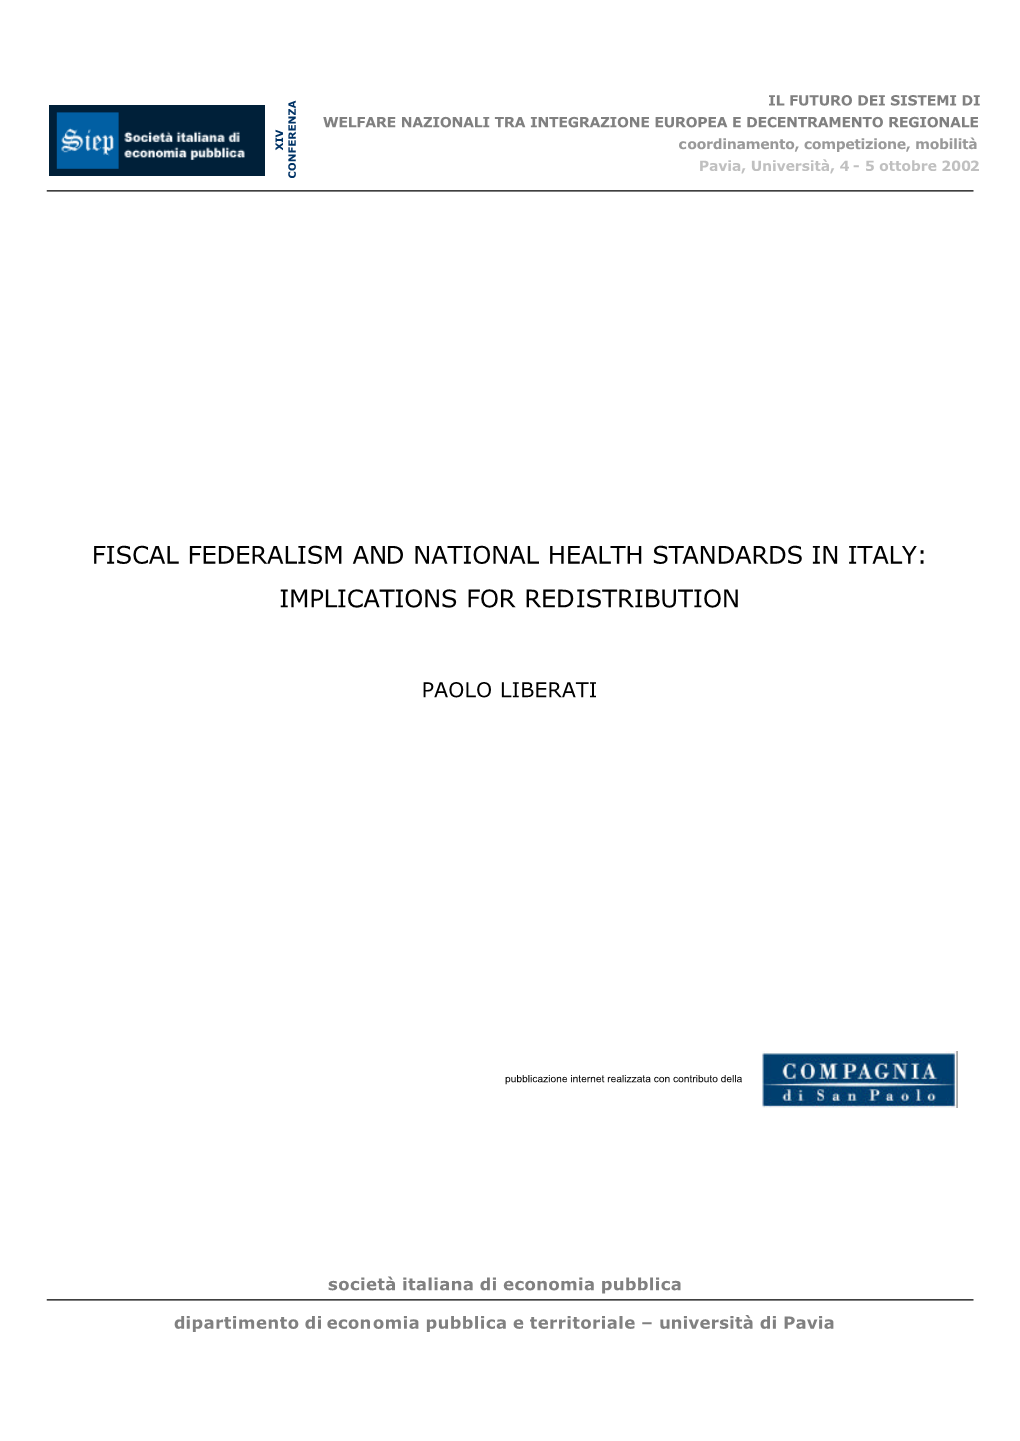 Fiscal Federalism and National Health Standards in Italy: Implications for Redistribution